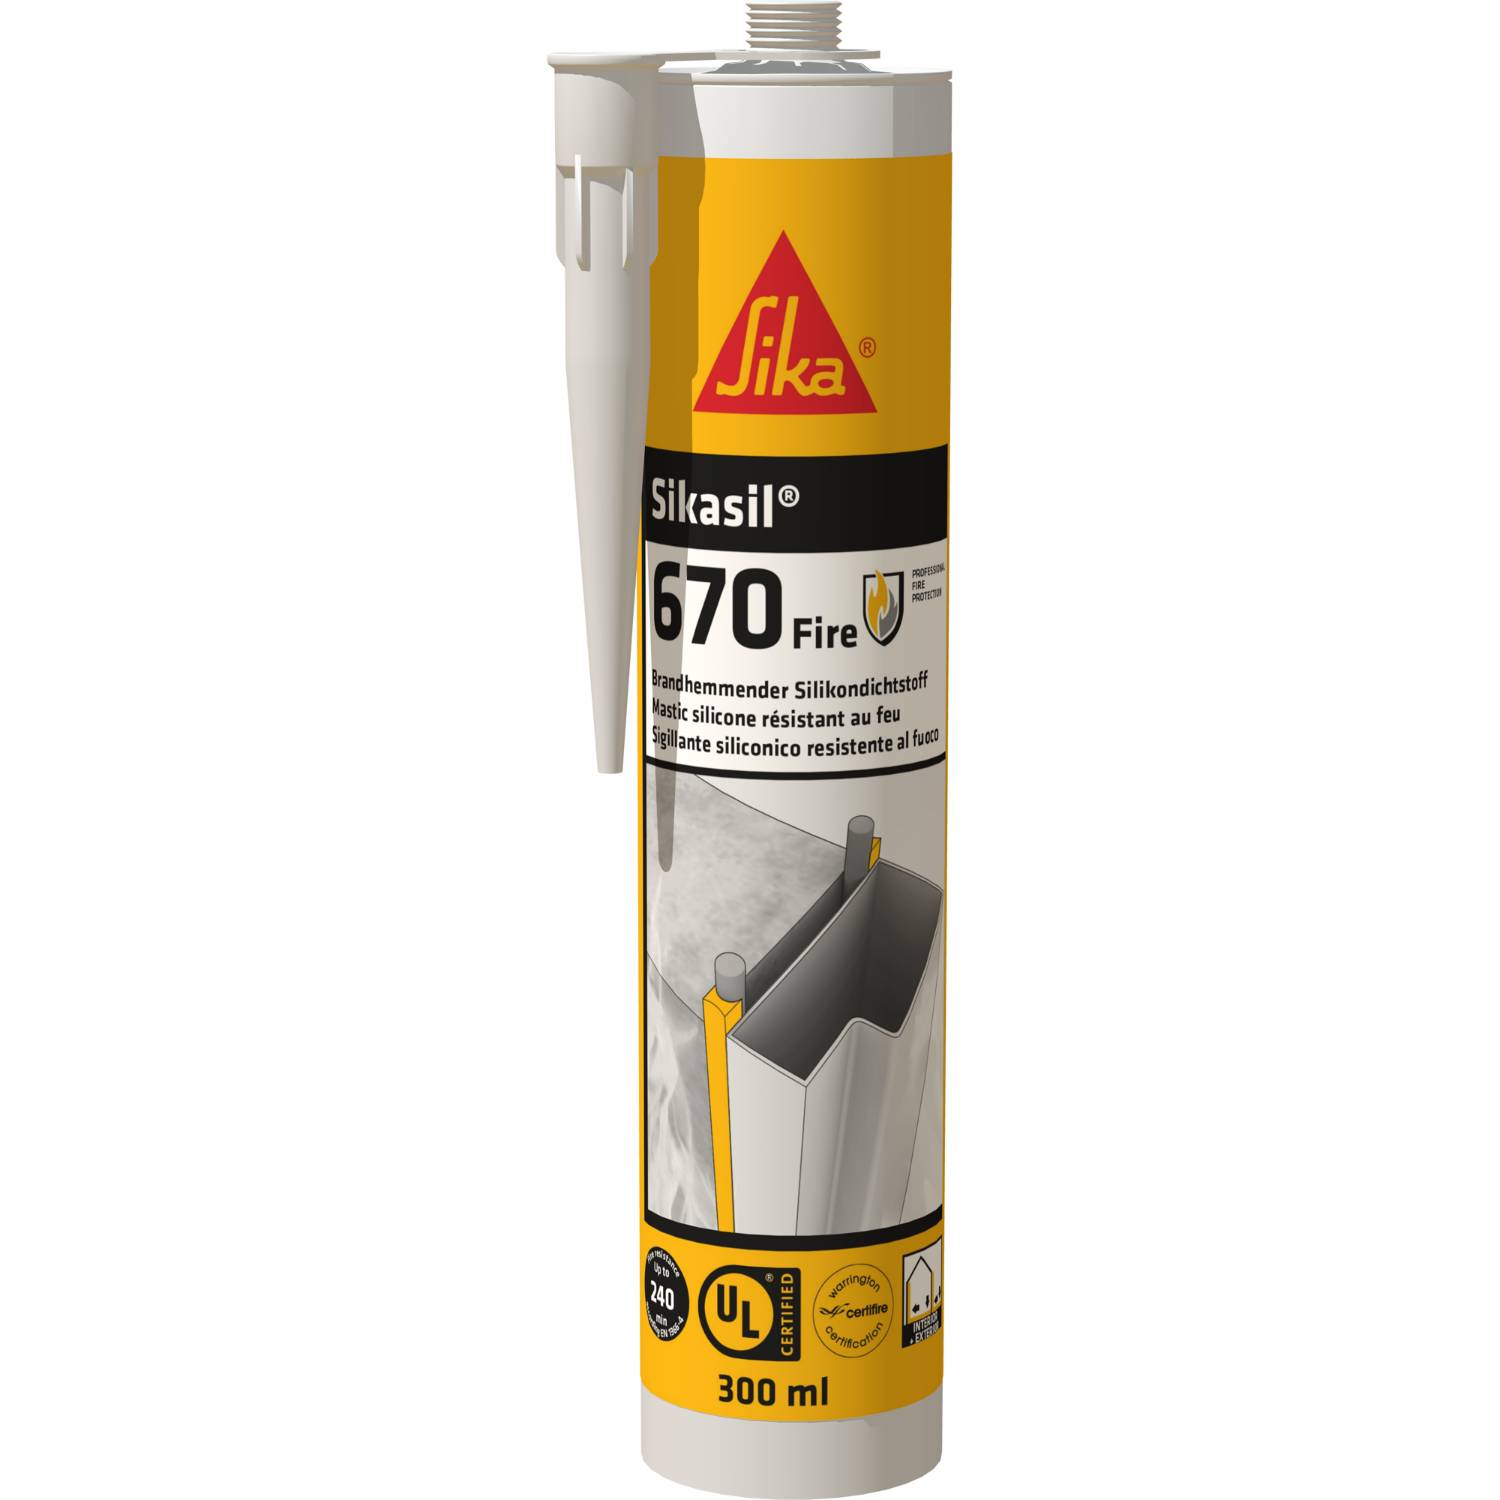 Sikasil®-670 Fire - Fire rated joint sealant